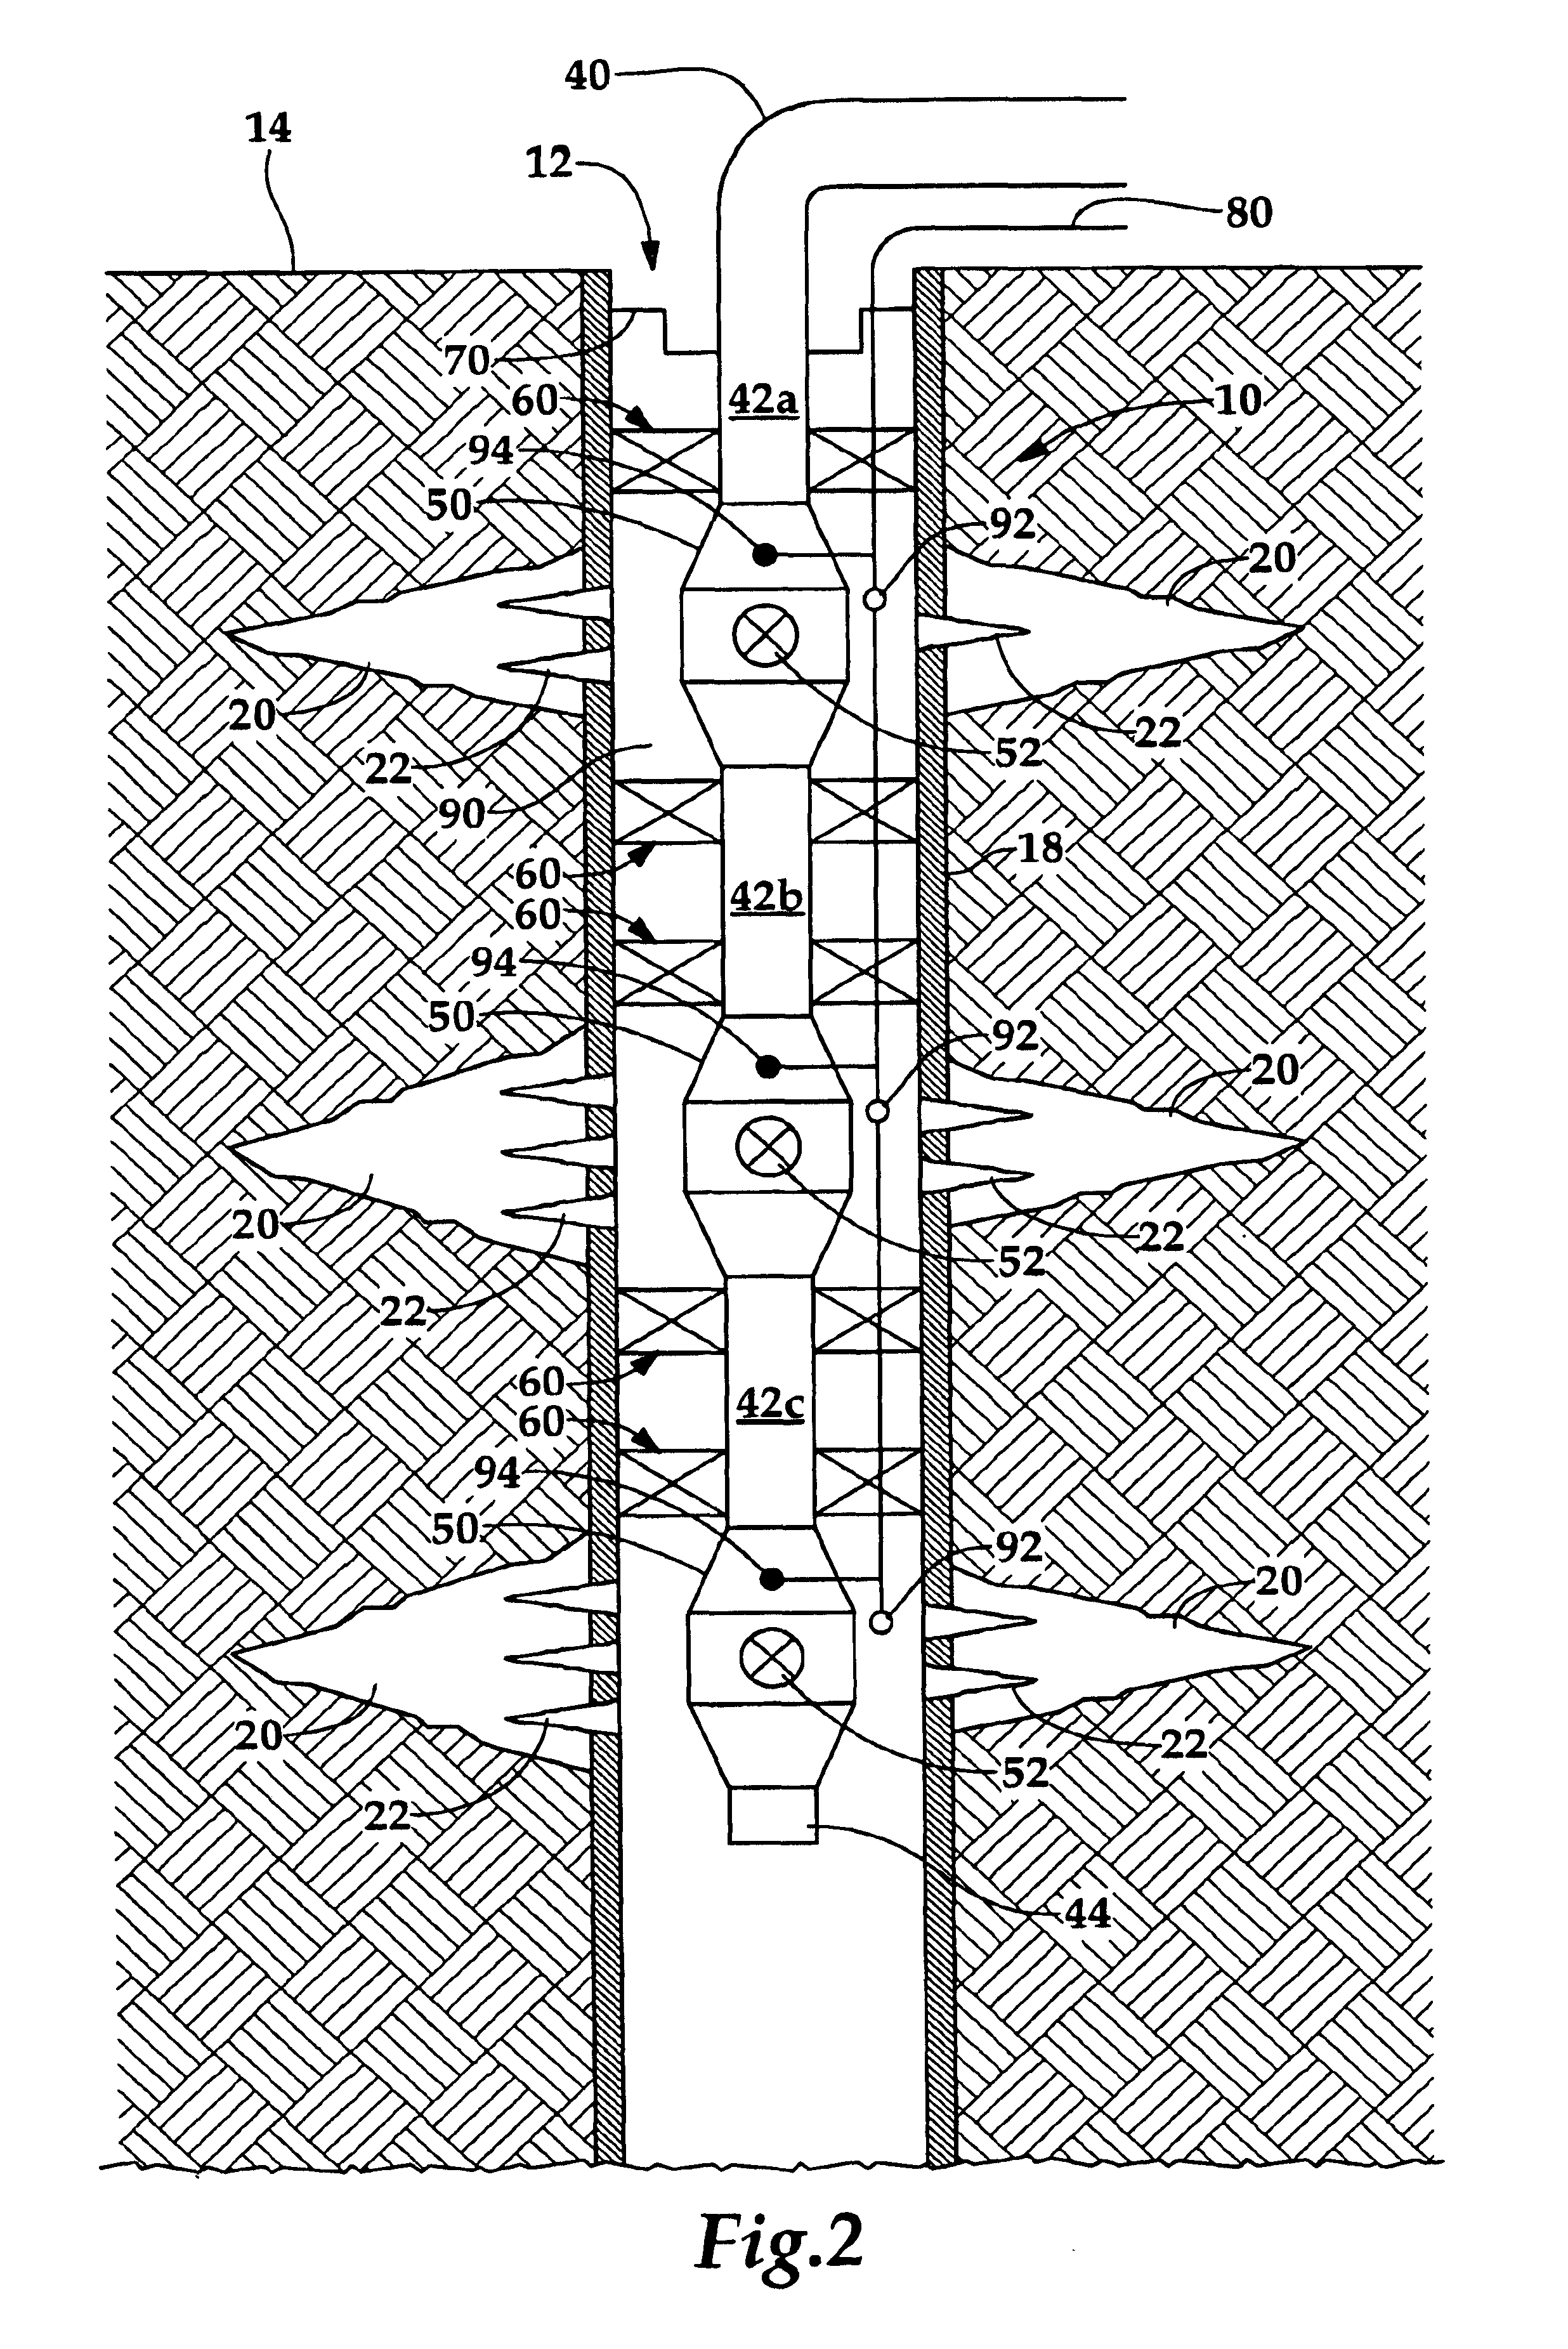 Wellbore power generating system for downhole operation